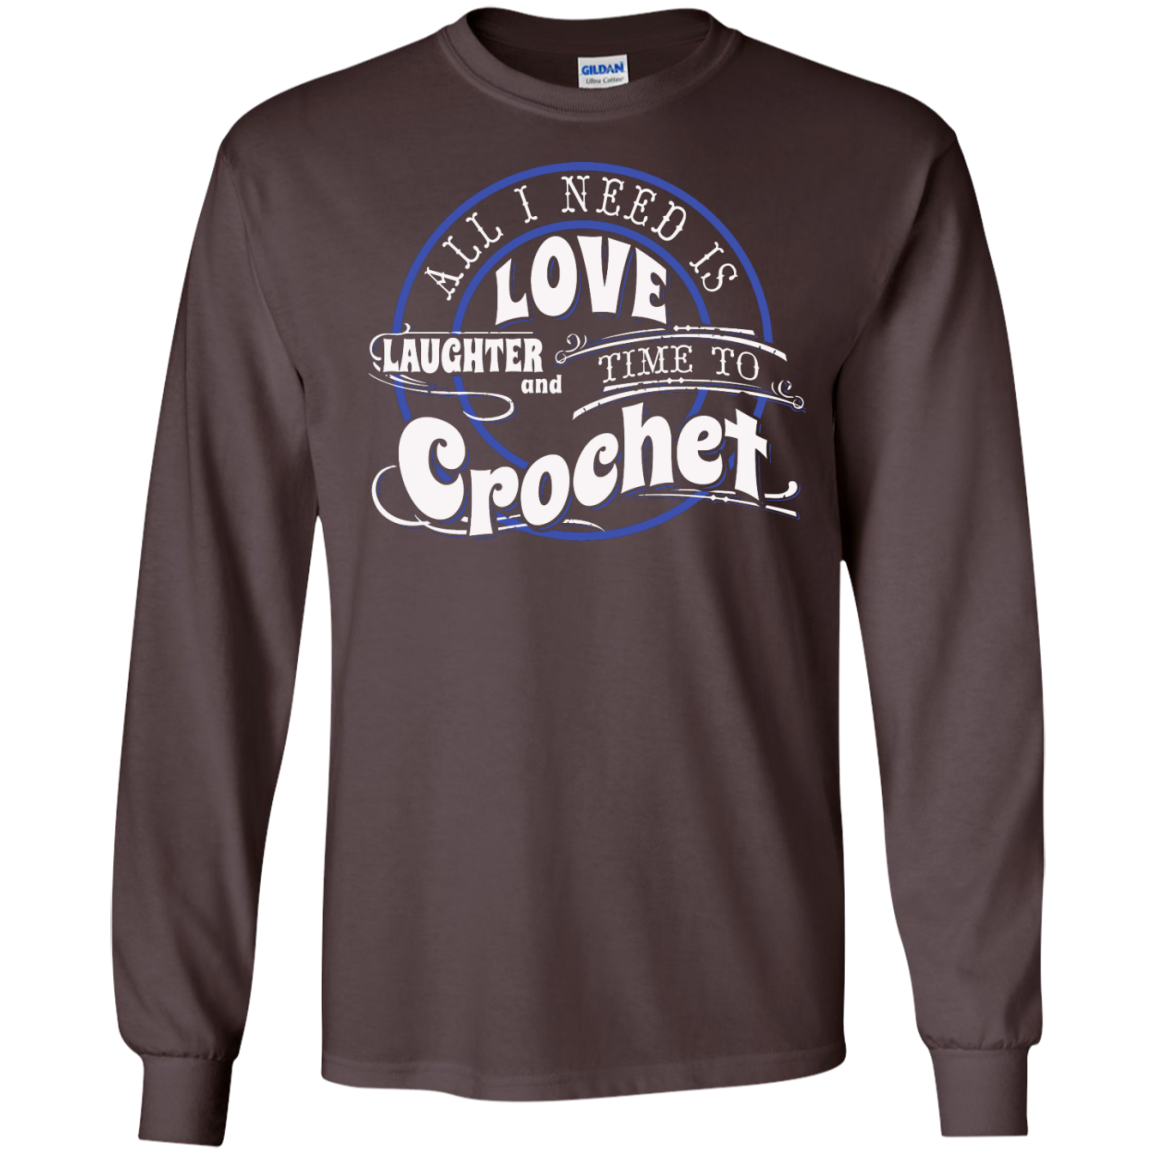 Time to Crochet Long Sleeve Ultra Cotton T-Shirt - Crafter4Life - 5